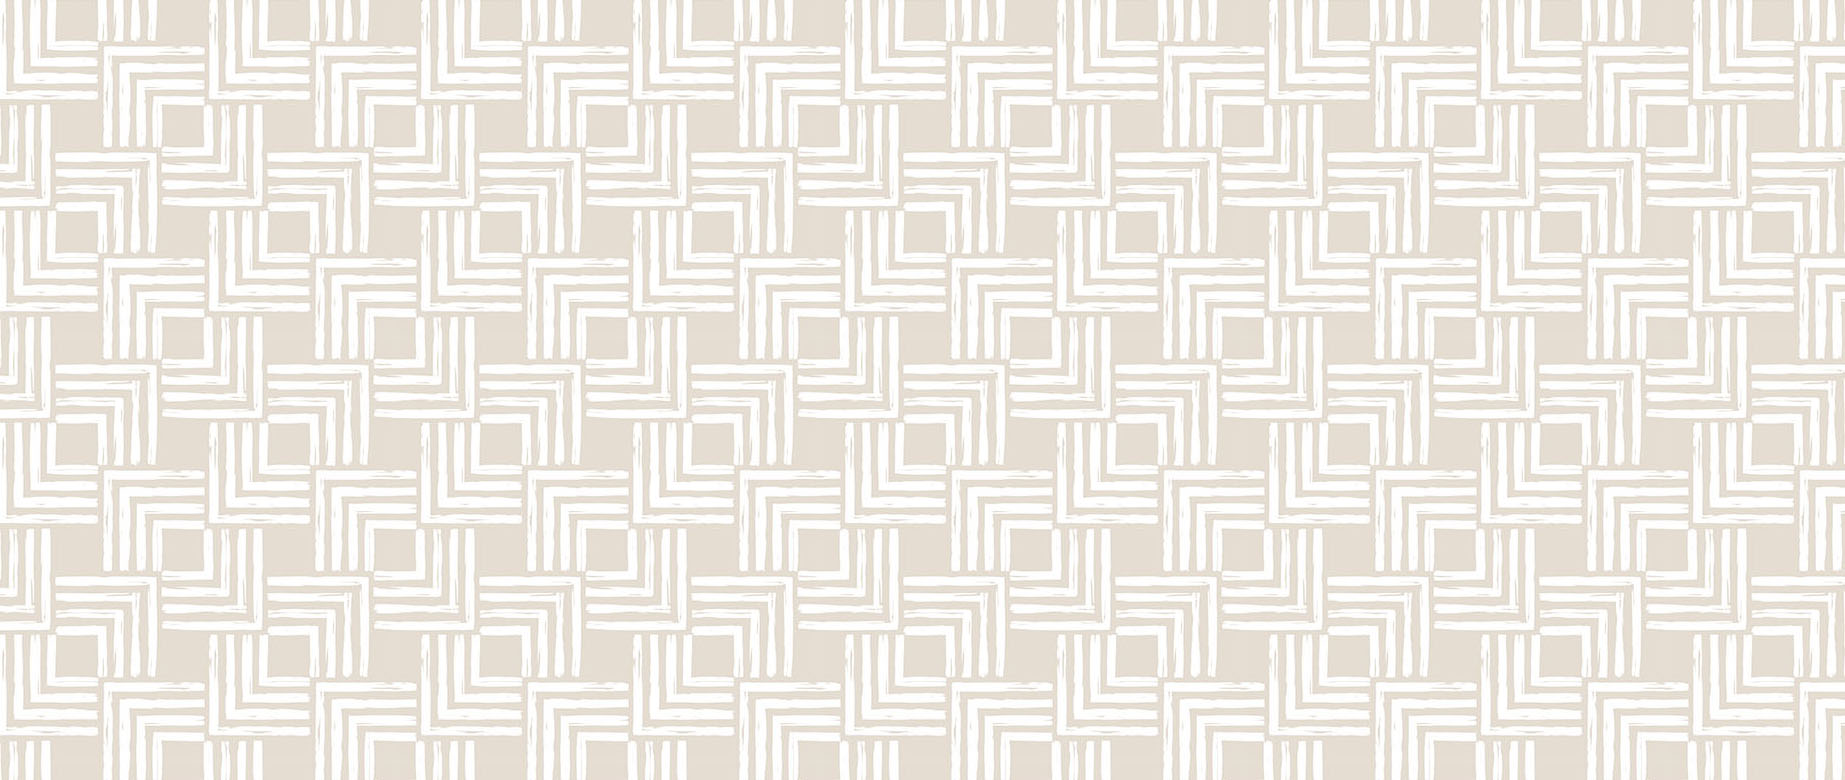 hand-drawn-overlapping-squares-wallpaper-seamless-repeat-view